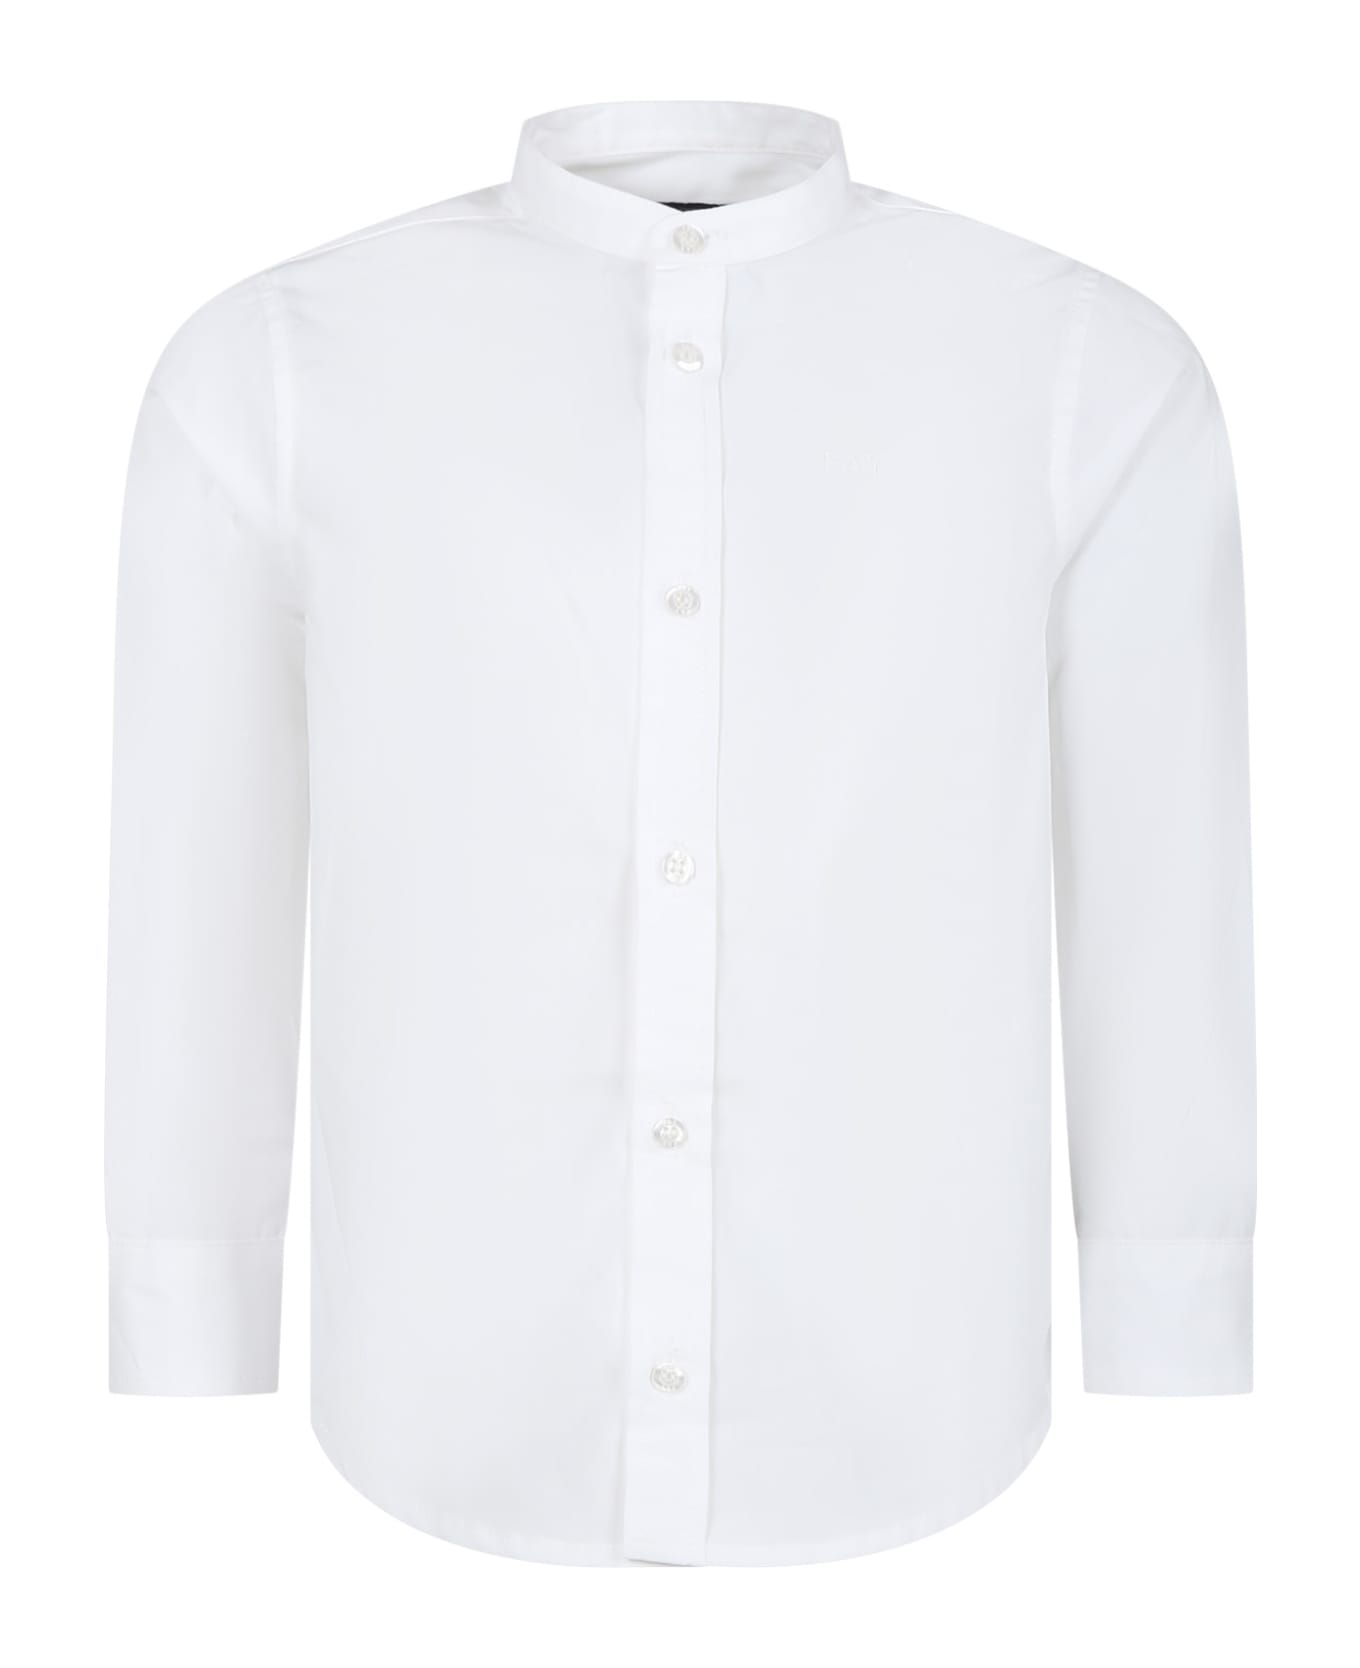 Fay White Shirt For Boy With Logo - White シャツ